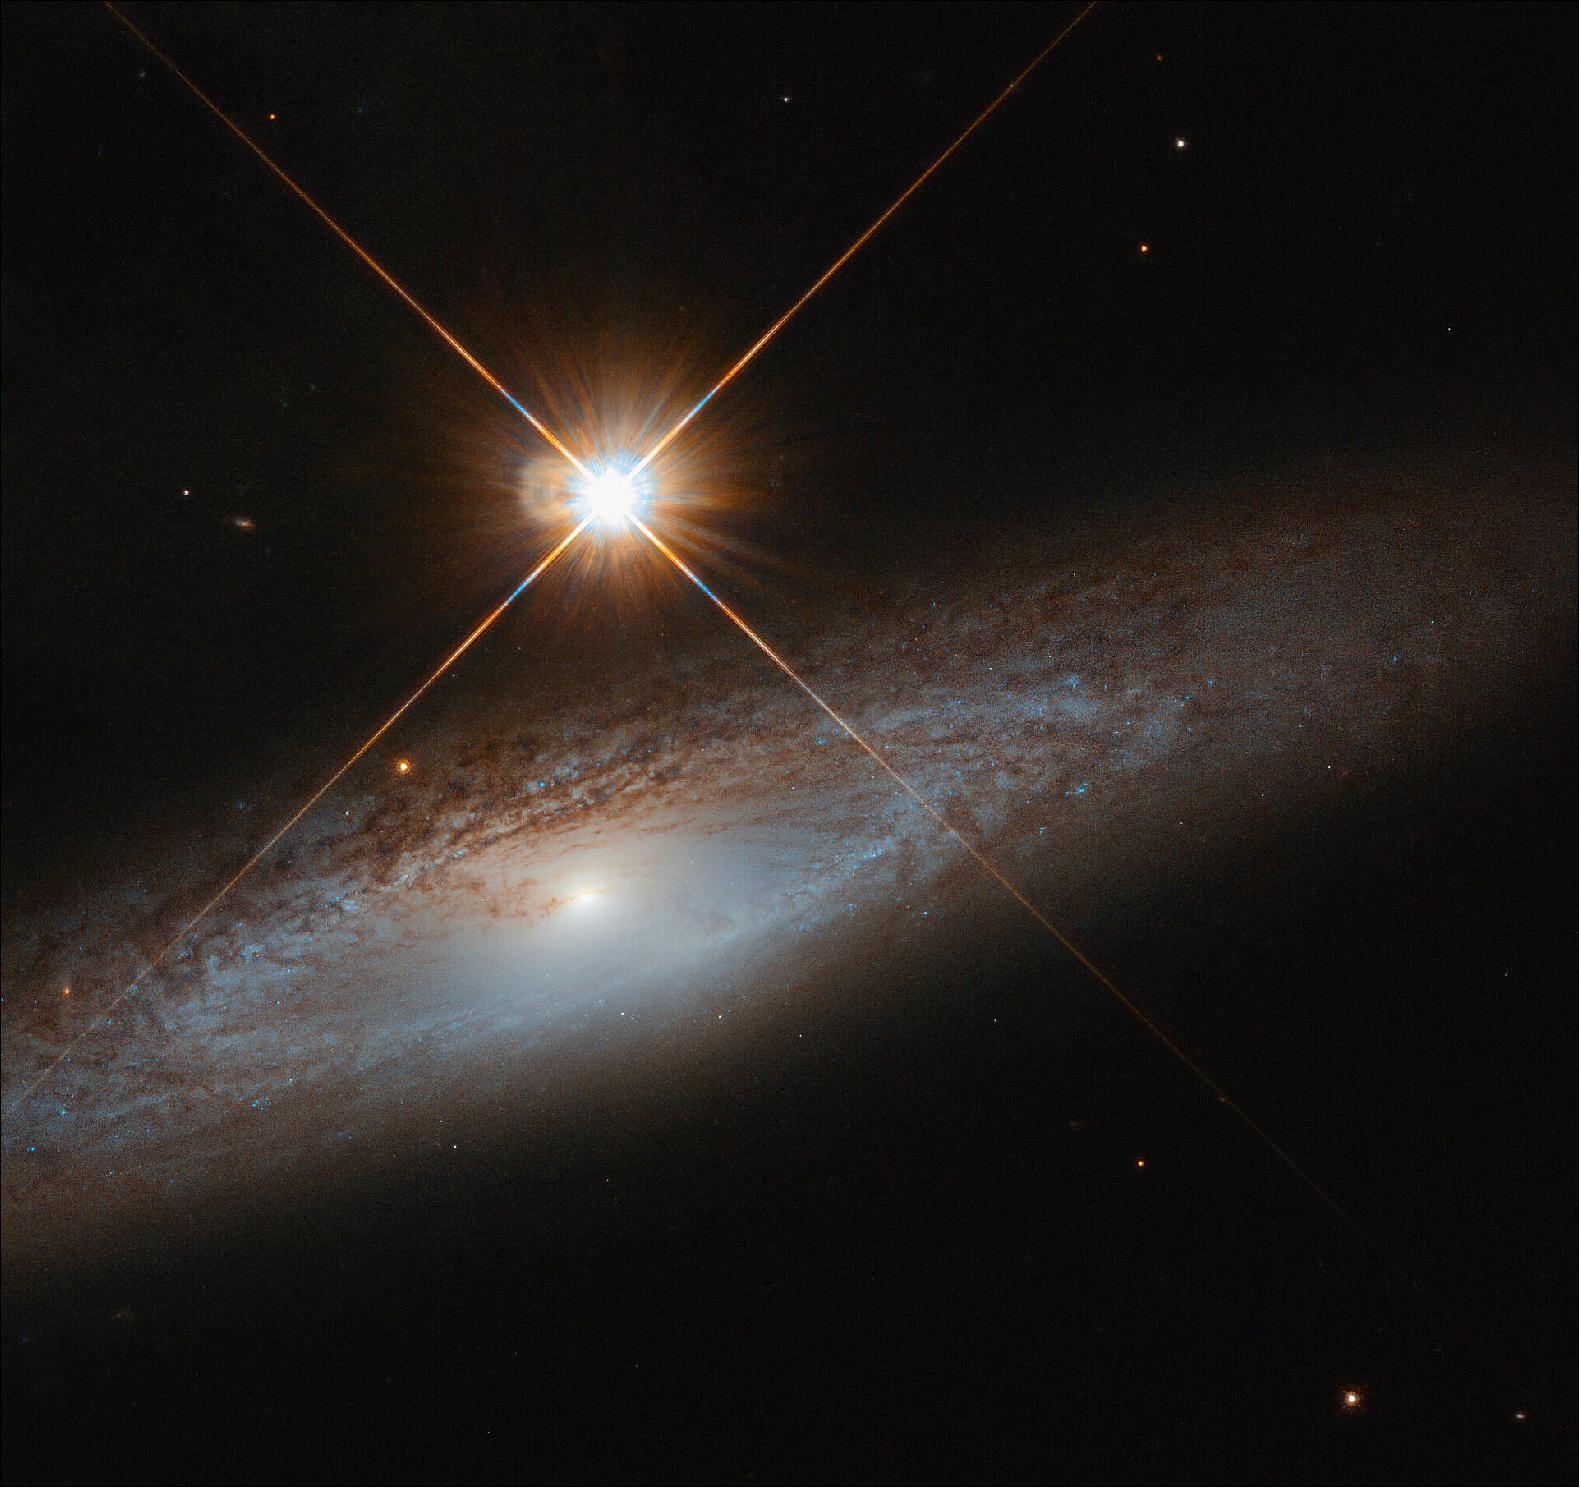 Figure 118: A bright foreground star isn't enough to distract from the grandeur of the galaxy UGC 3885, captured here by the NASA/ESA Hubble Space Telescope. While this foreground star is incredibly bright to Hubble's eye, it does not outshine the details of the background galaxy (image credit: ESA/Hubble & NASA, J. Walsh; CC BY 4.0)